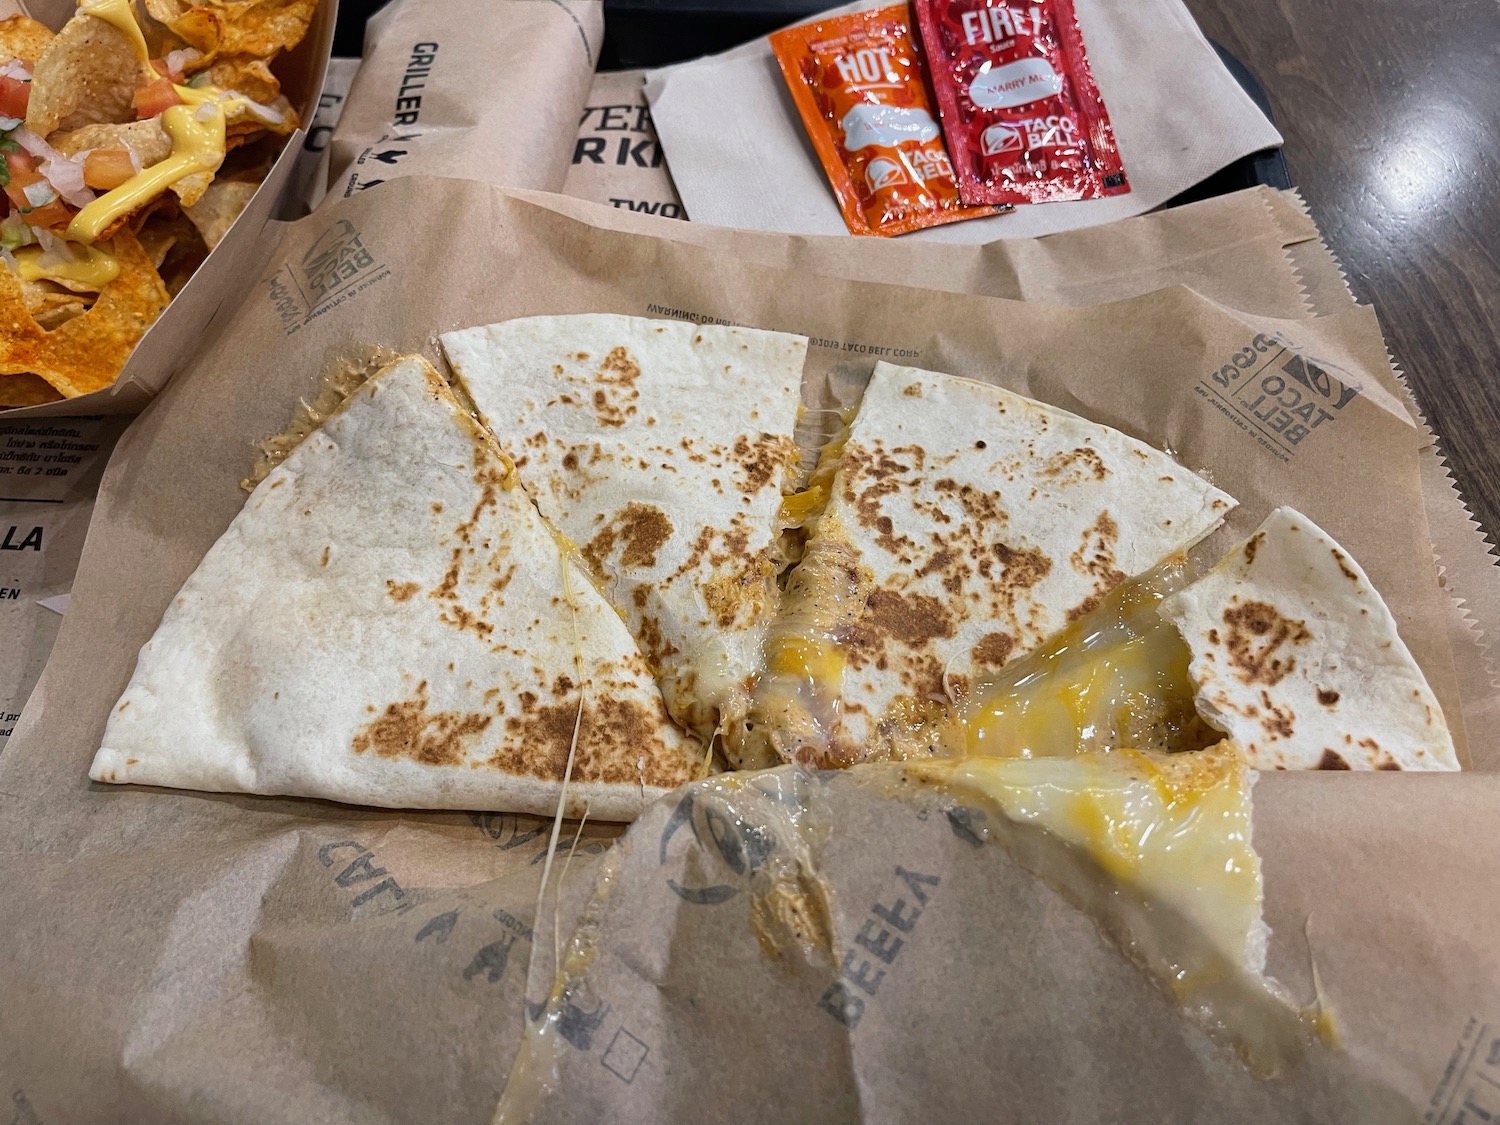 quesadilla on a paper bag with a couple of packets of condiments